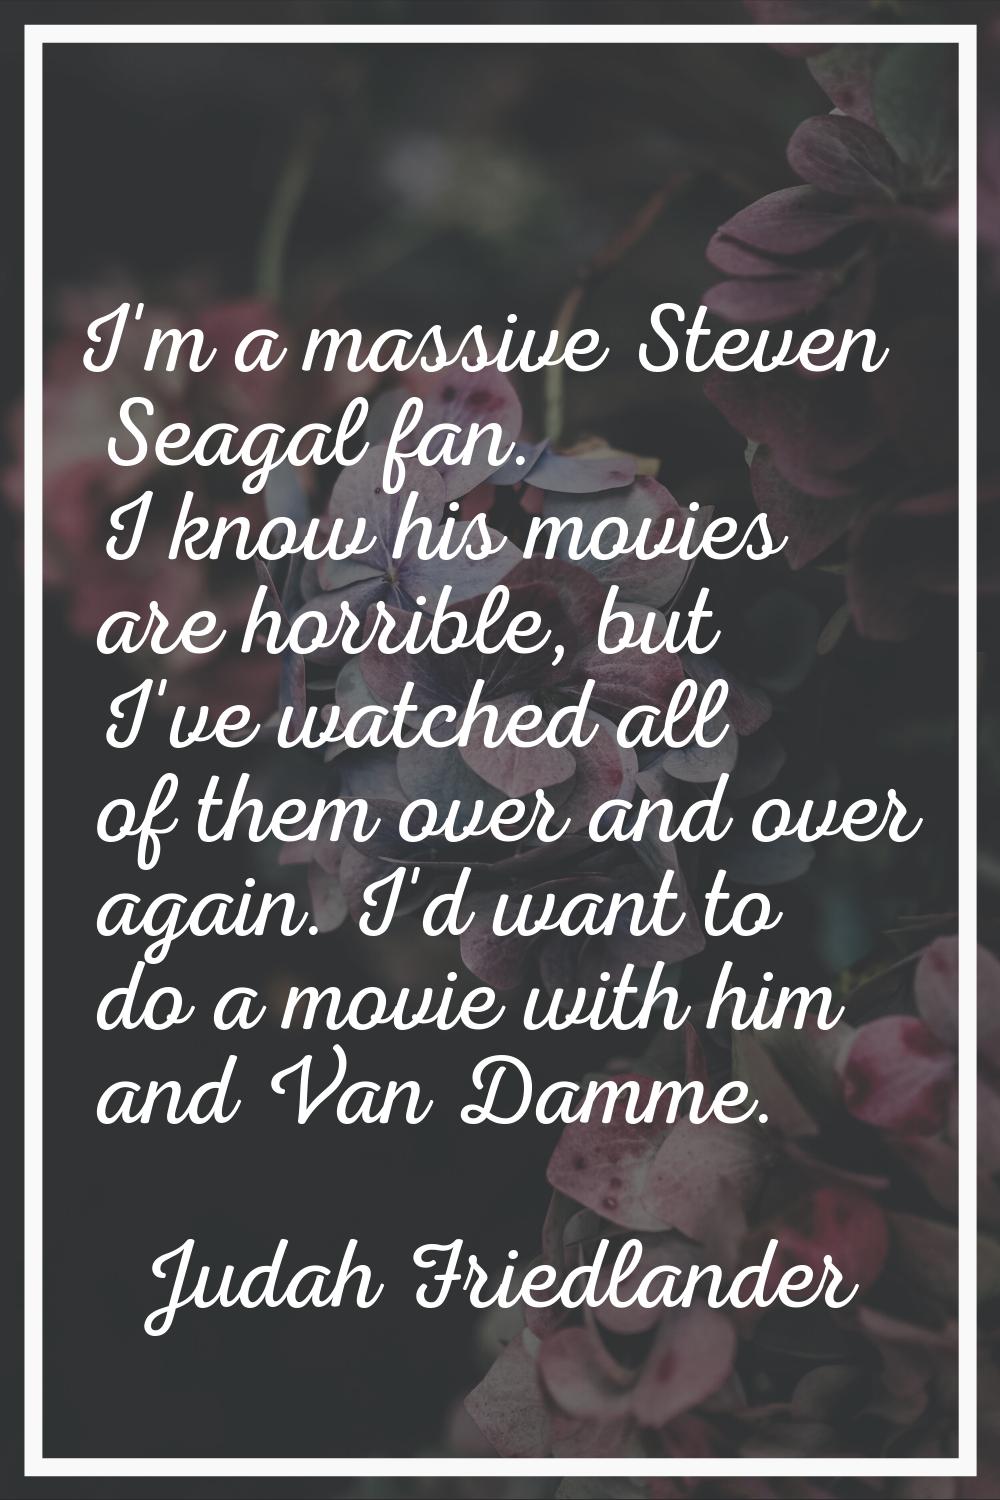 I'm a massive Steven Seagal fan. I know his movies are horrible, but I've watched all of them over 